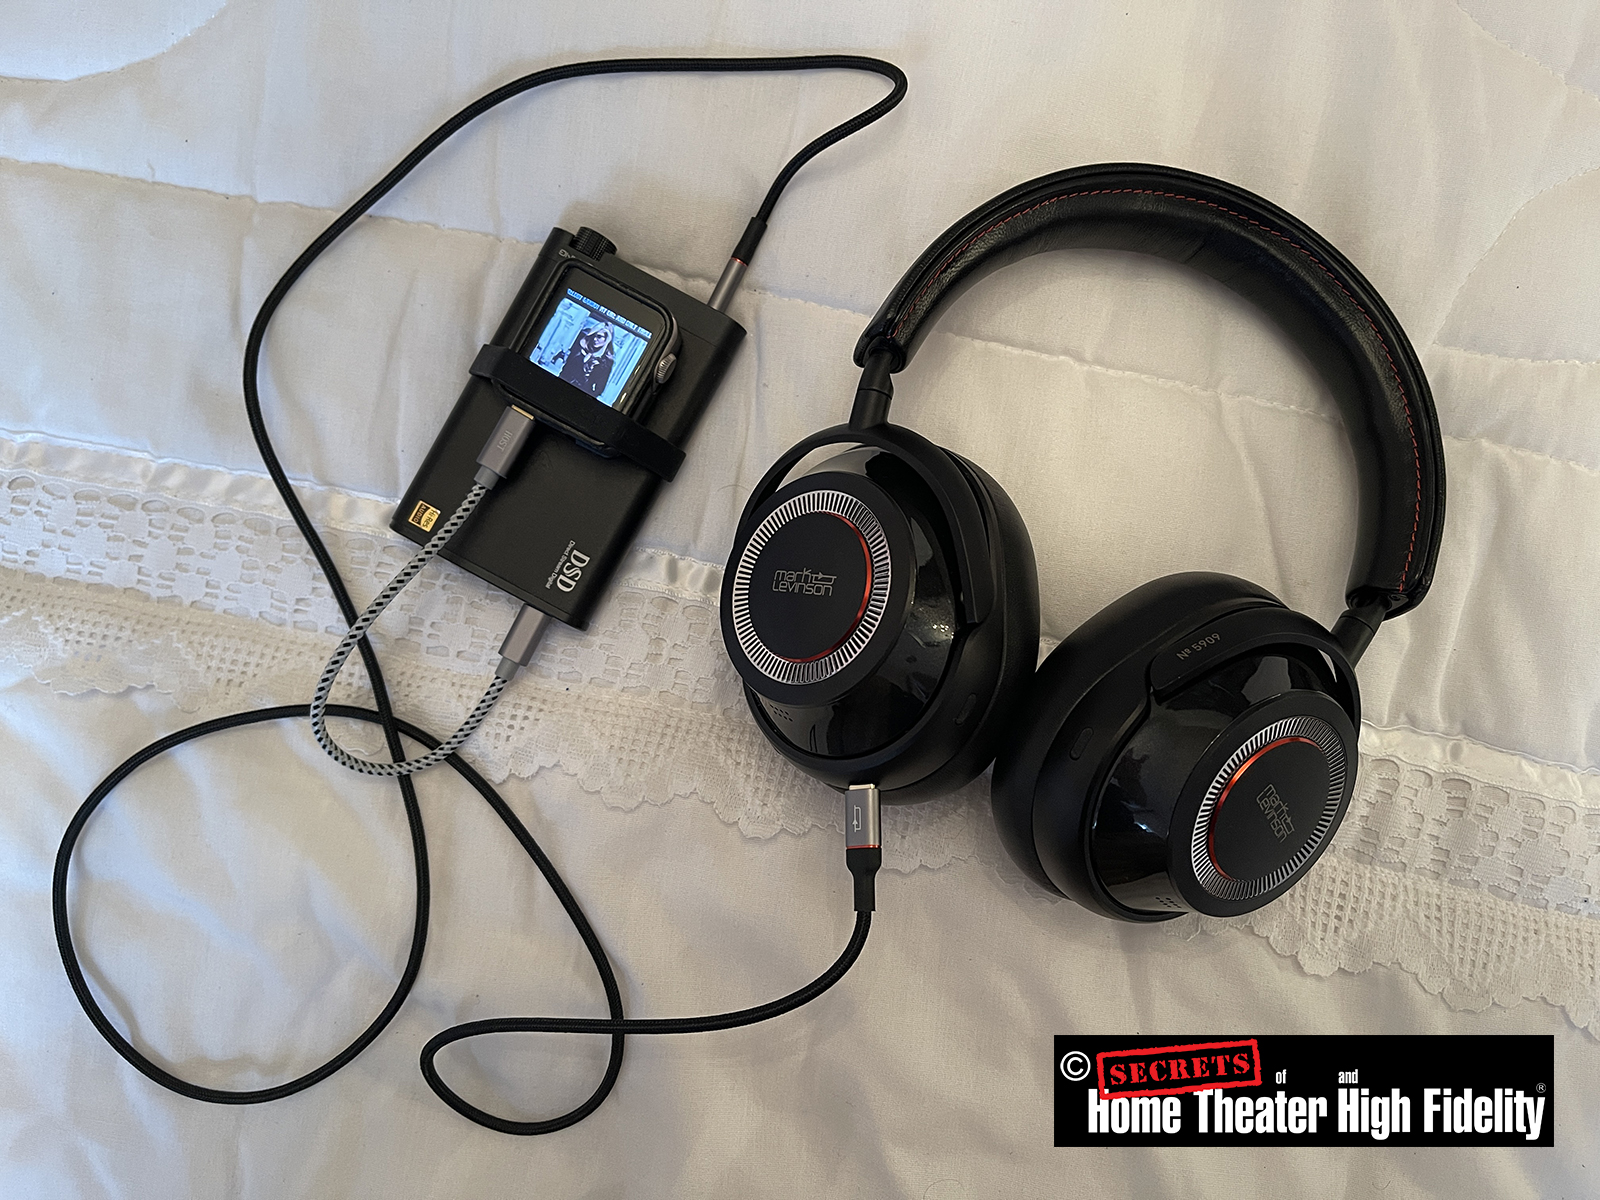 Mark Levinson No. 5909 Wireless Noise Canceling Bluetooth Headphones in use